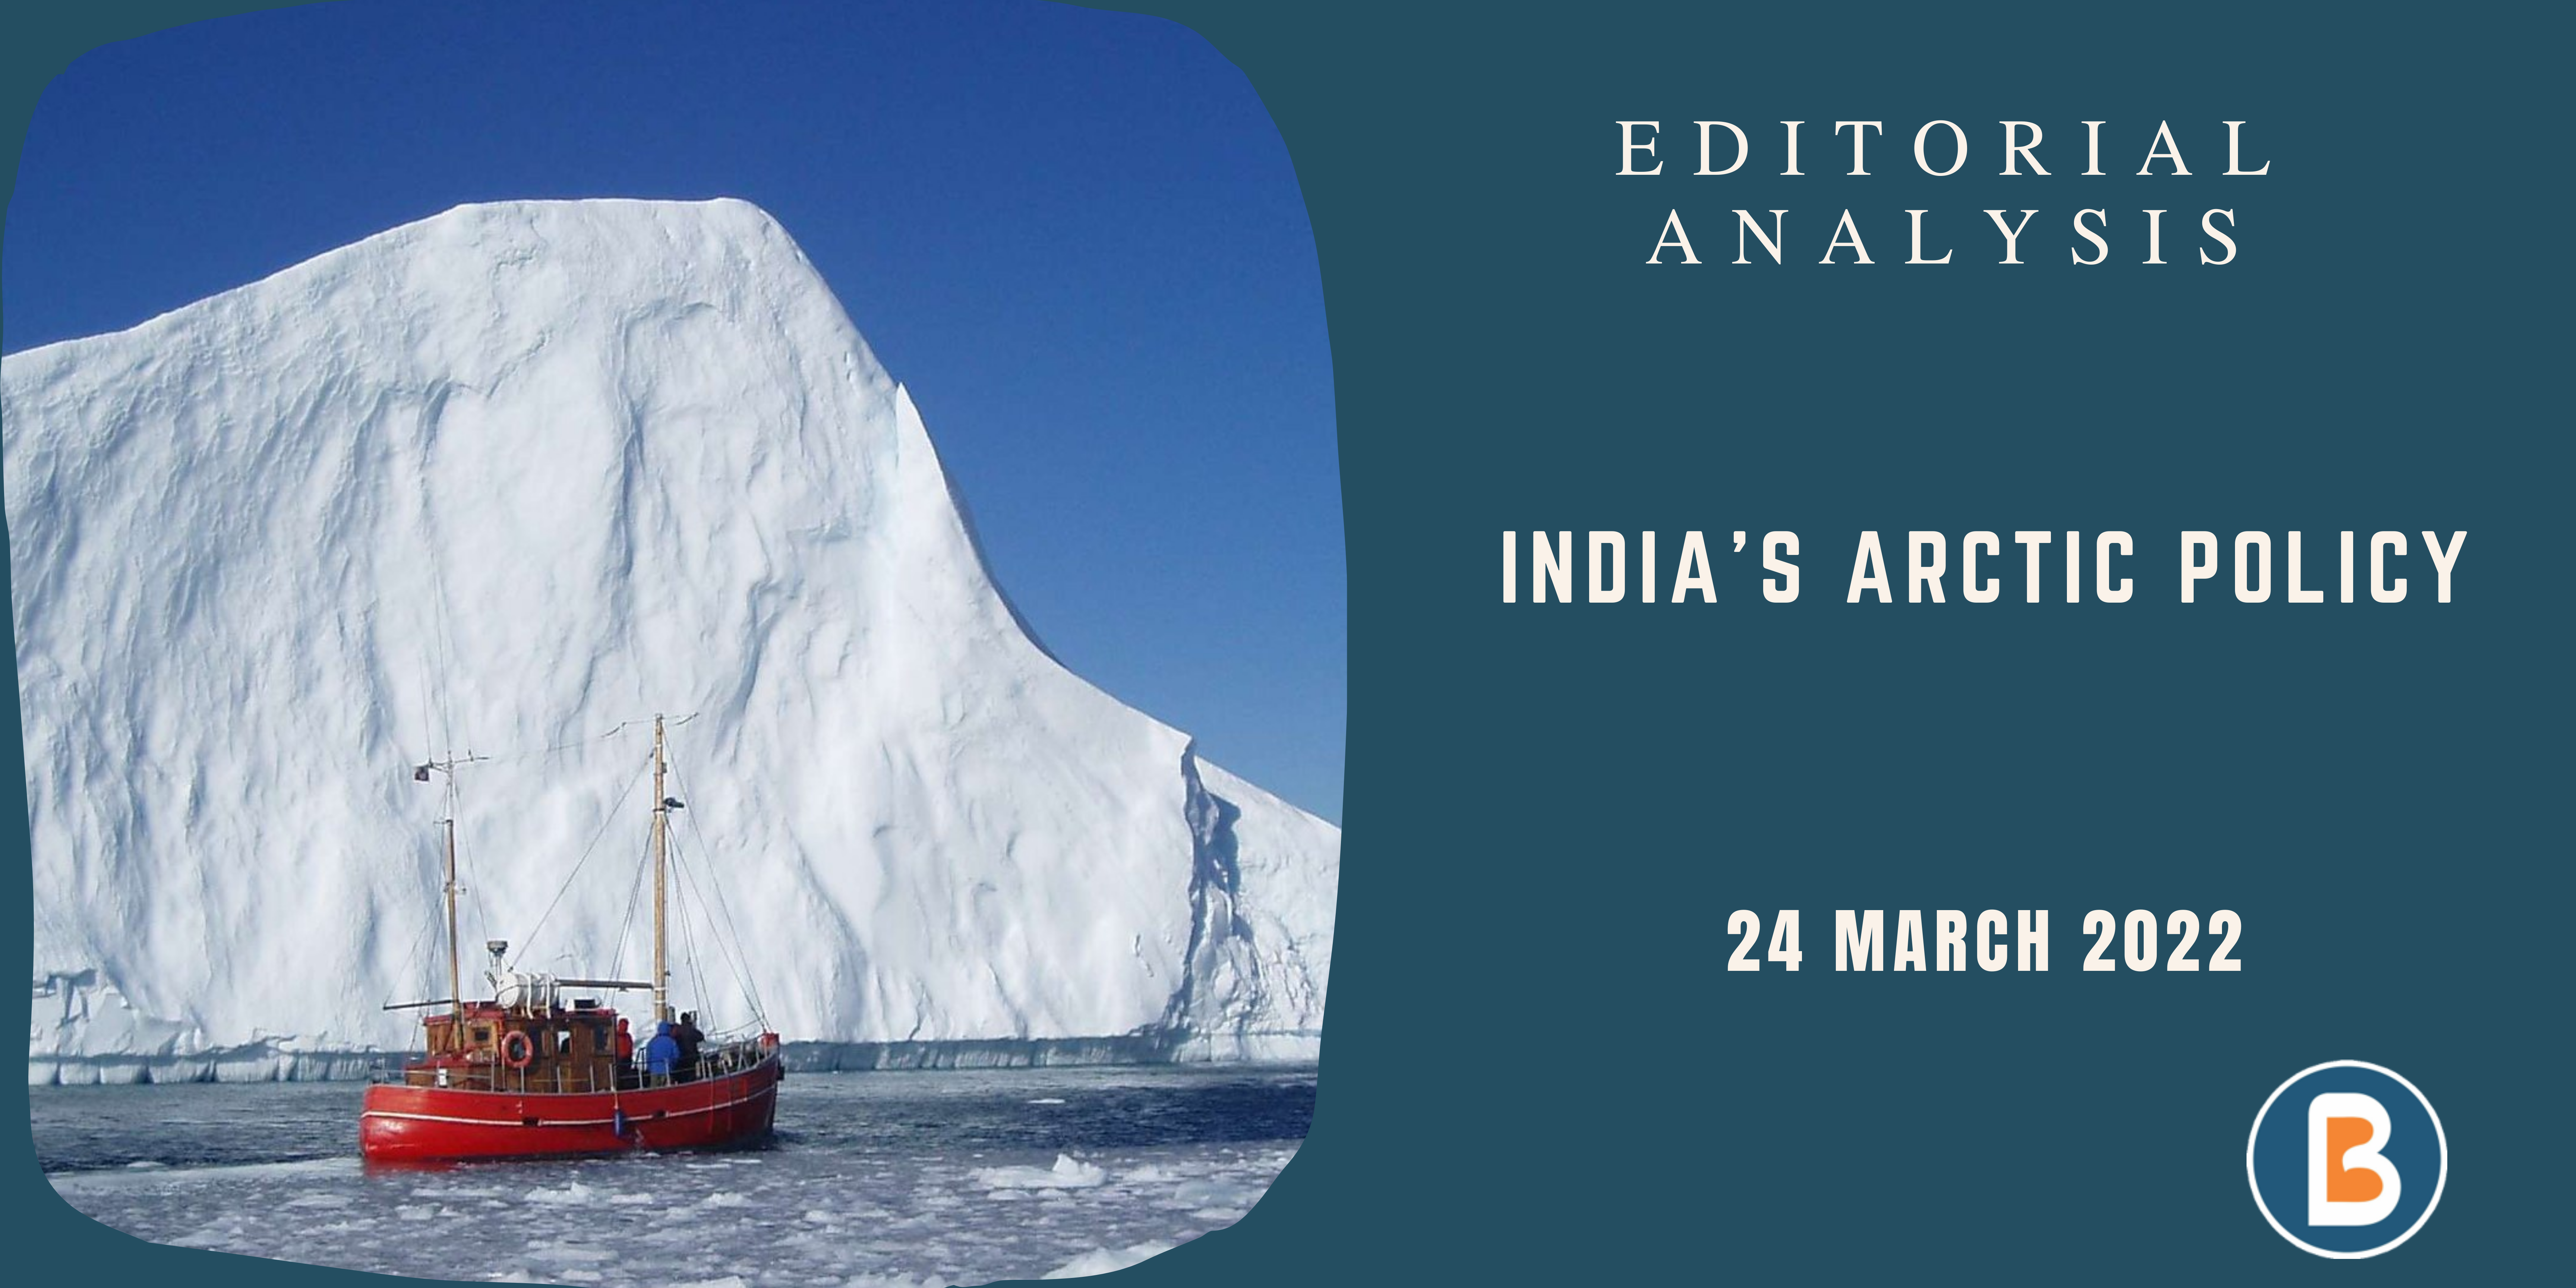 Editorial Analysis for IAS - India's Arctic Policy